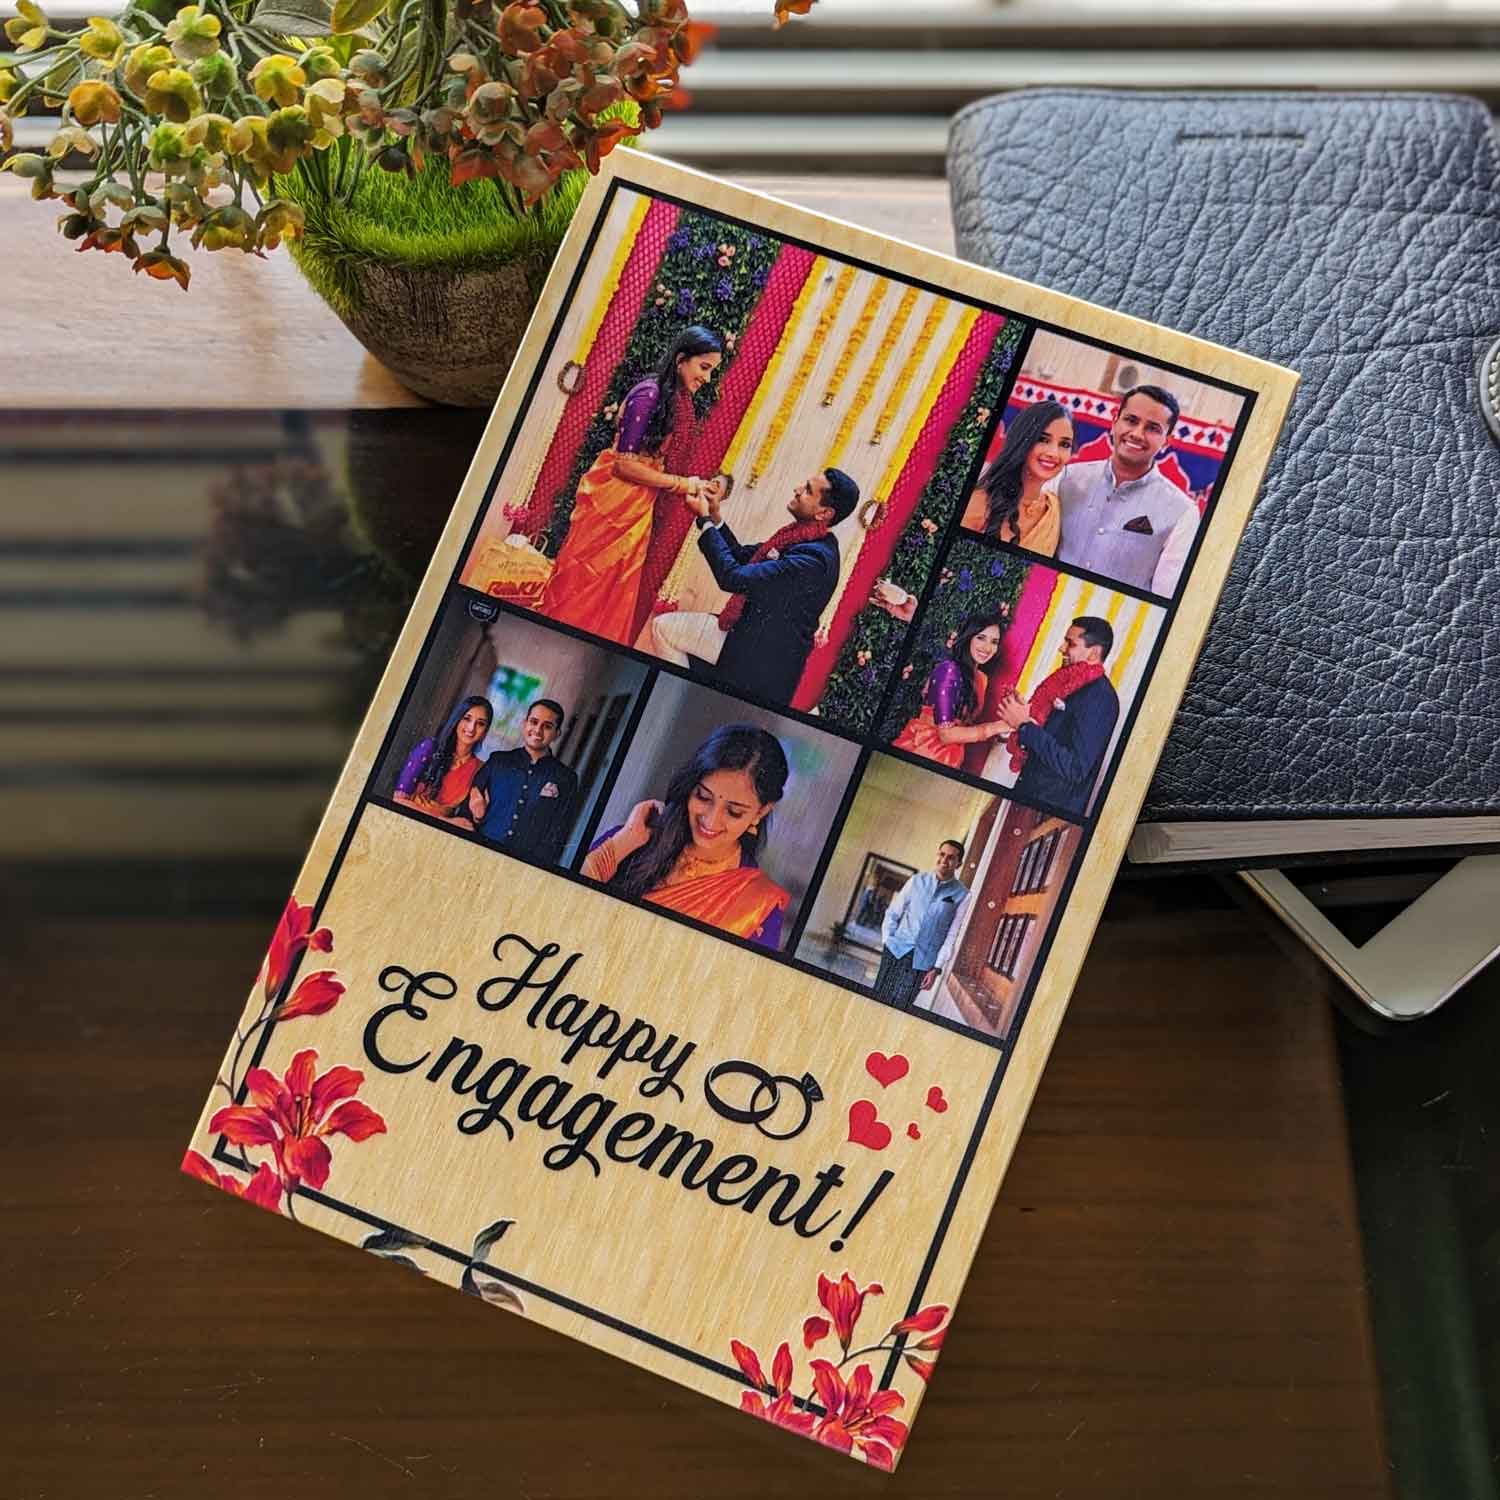 "Happy Engagement" Personalized Photo Collage Wooden Frame | Customizable Gift for Couples